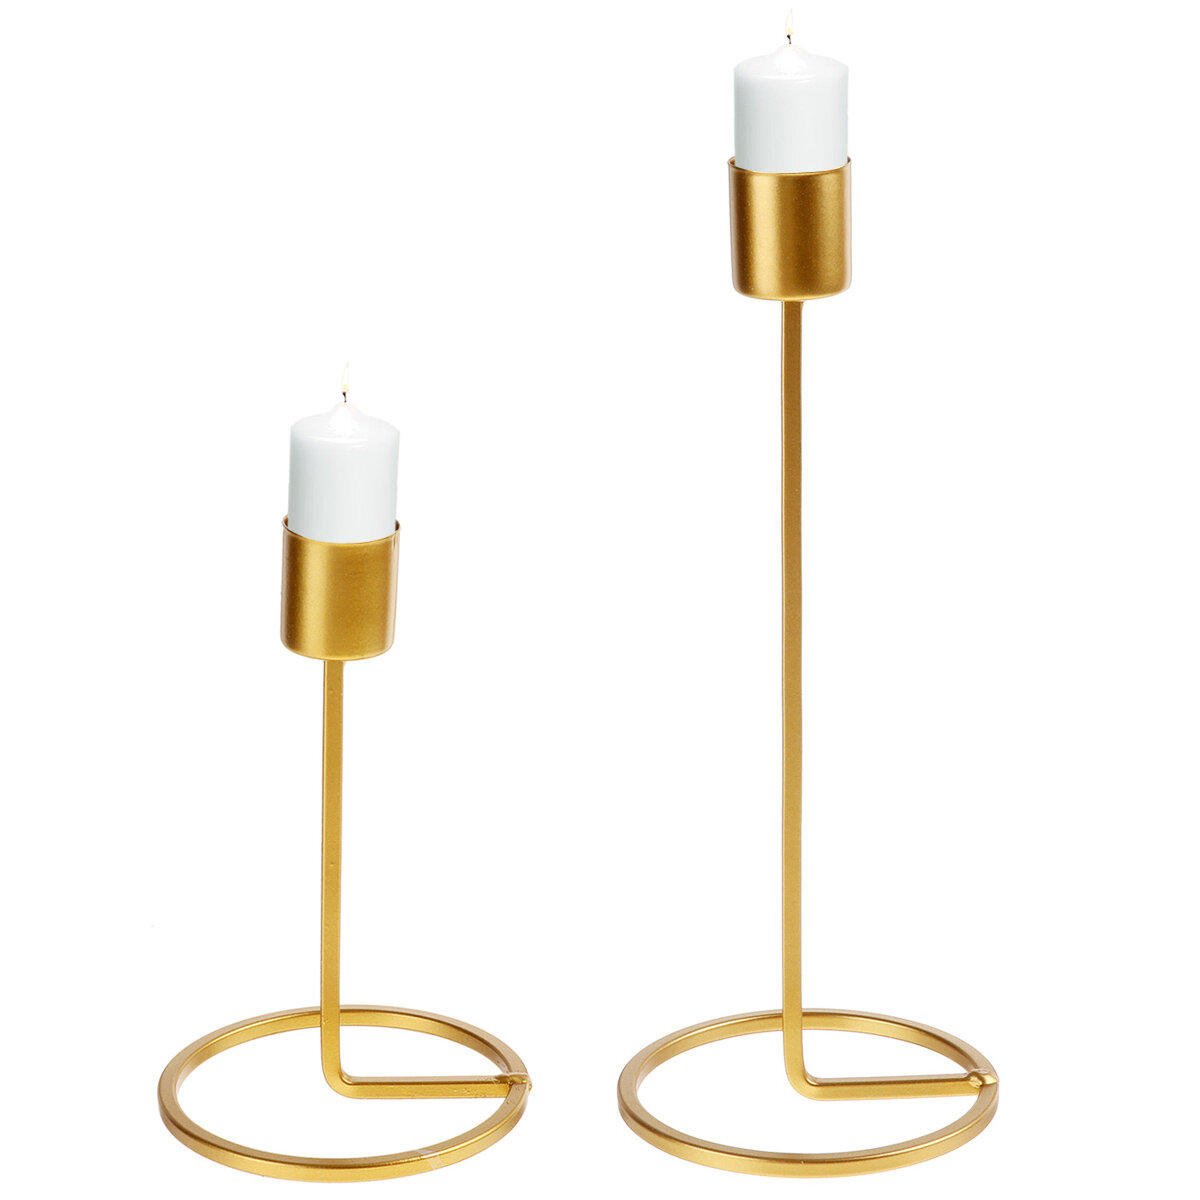 Golden Single Head Candle Holder Metal Nordic Geometric Candlestick For Home Office Restaurant Roman